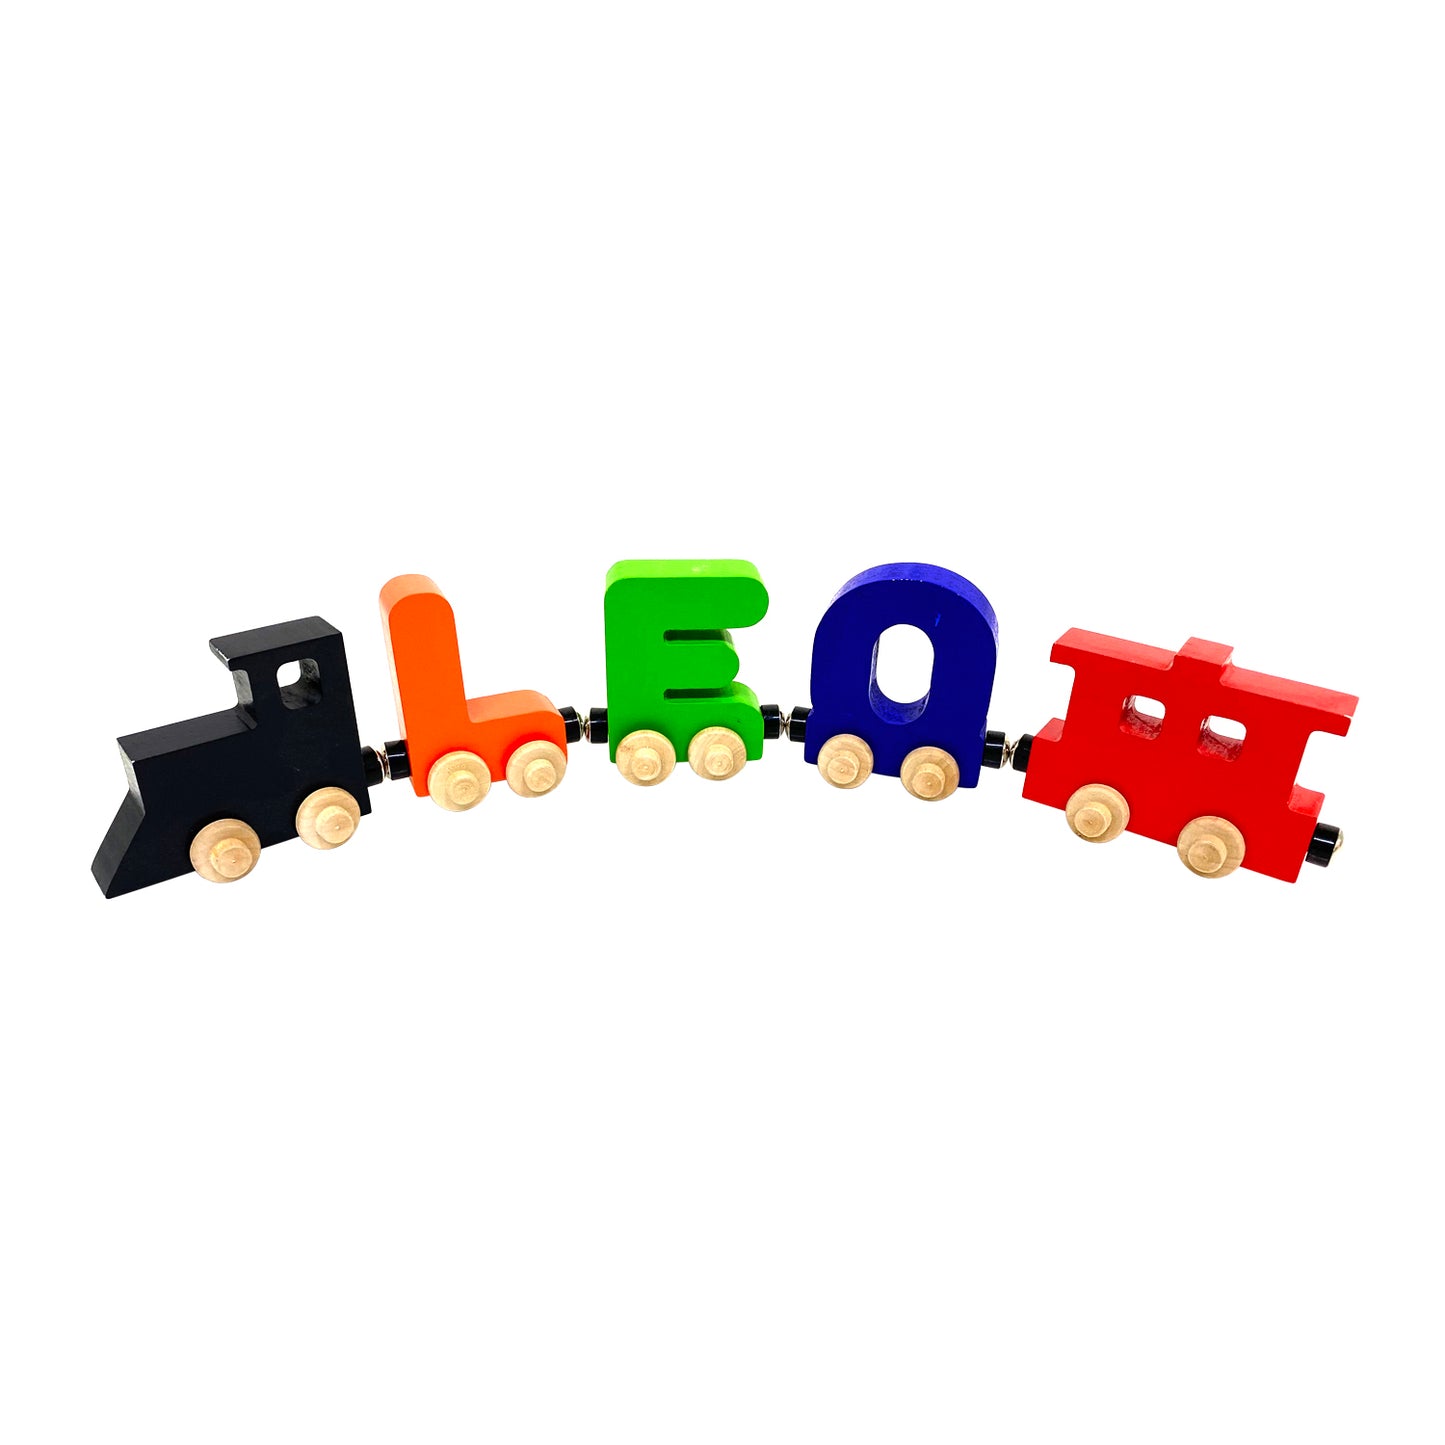 3 Letter Train Wooden Perosnalized Name Letters Includes Train & Wagon Letters Puzzle Includes Train & Wagon Free